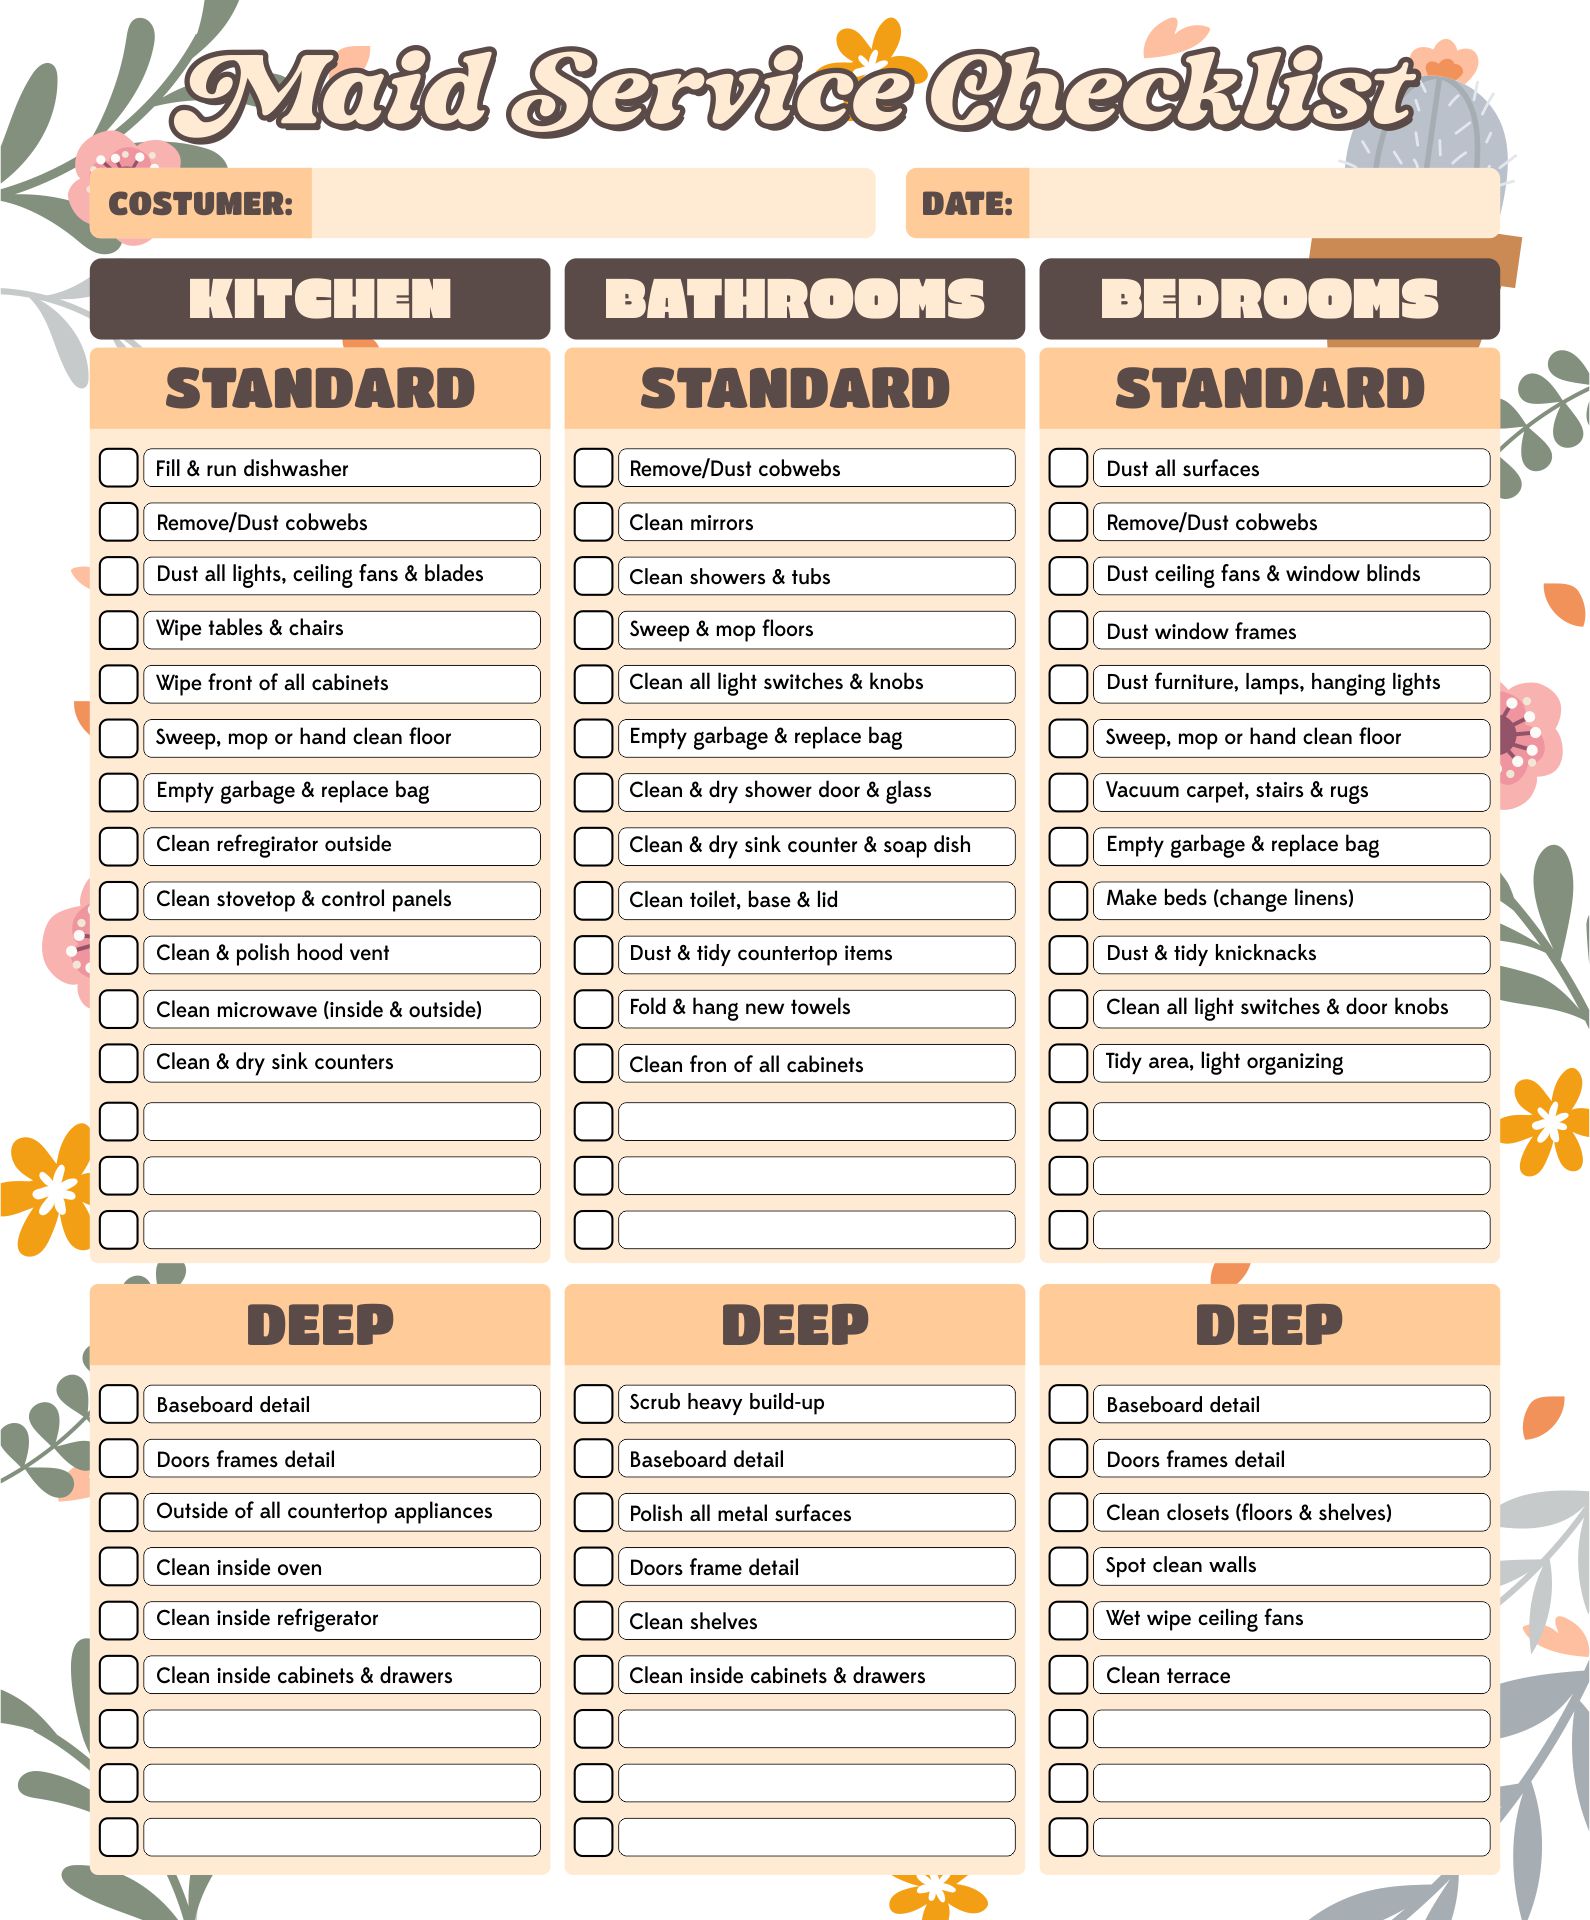 Printable House Cleaning Checklist Template